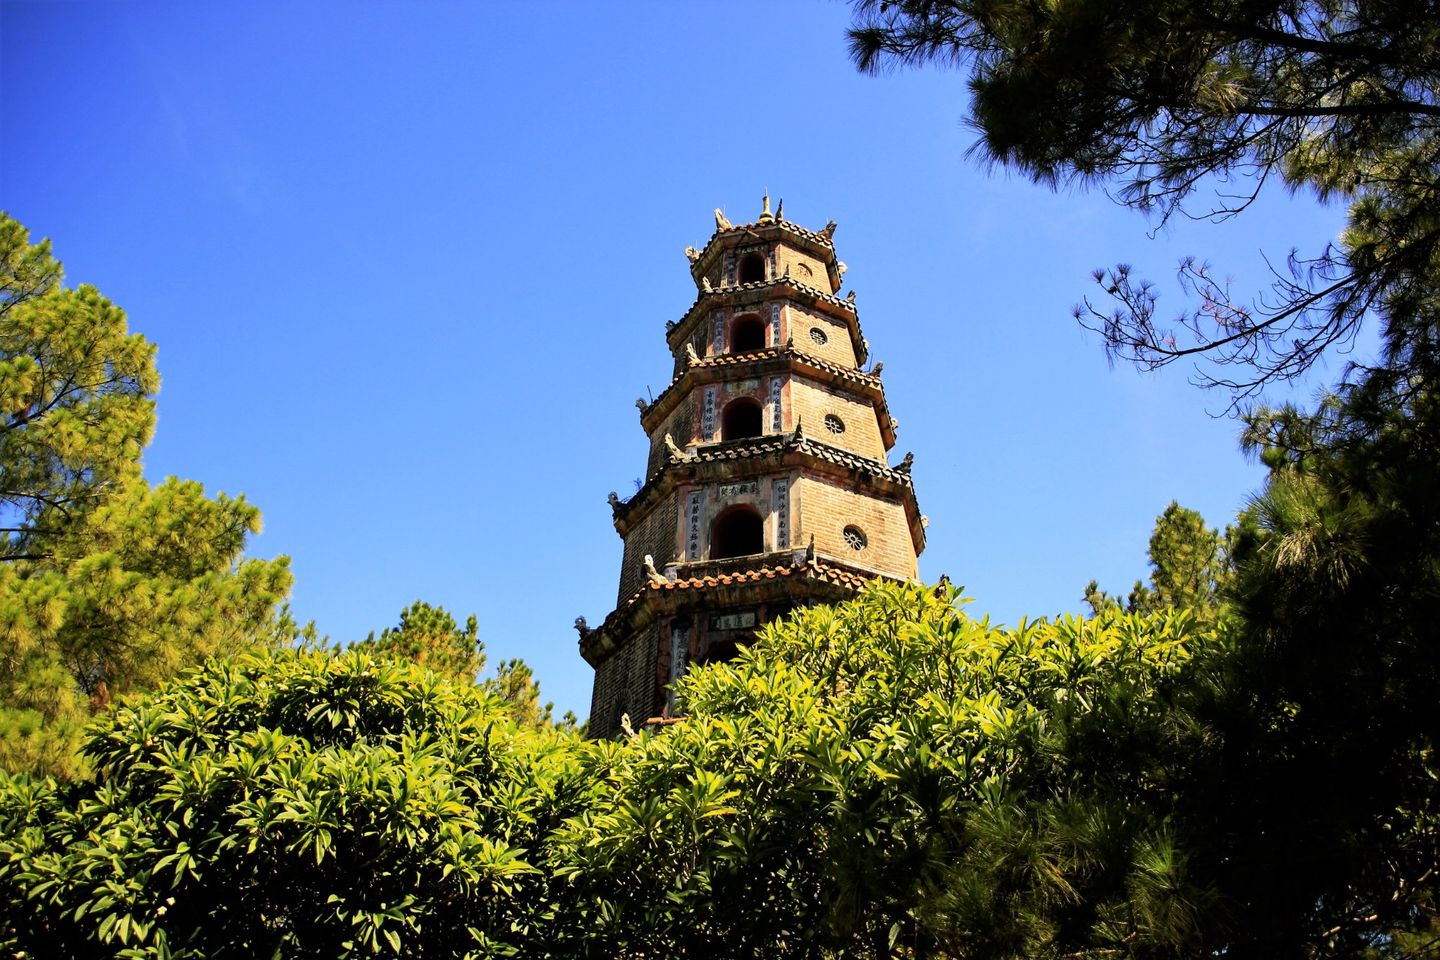 Another view of the pagoda